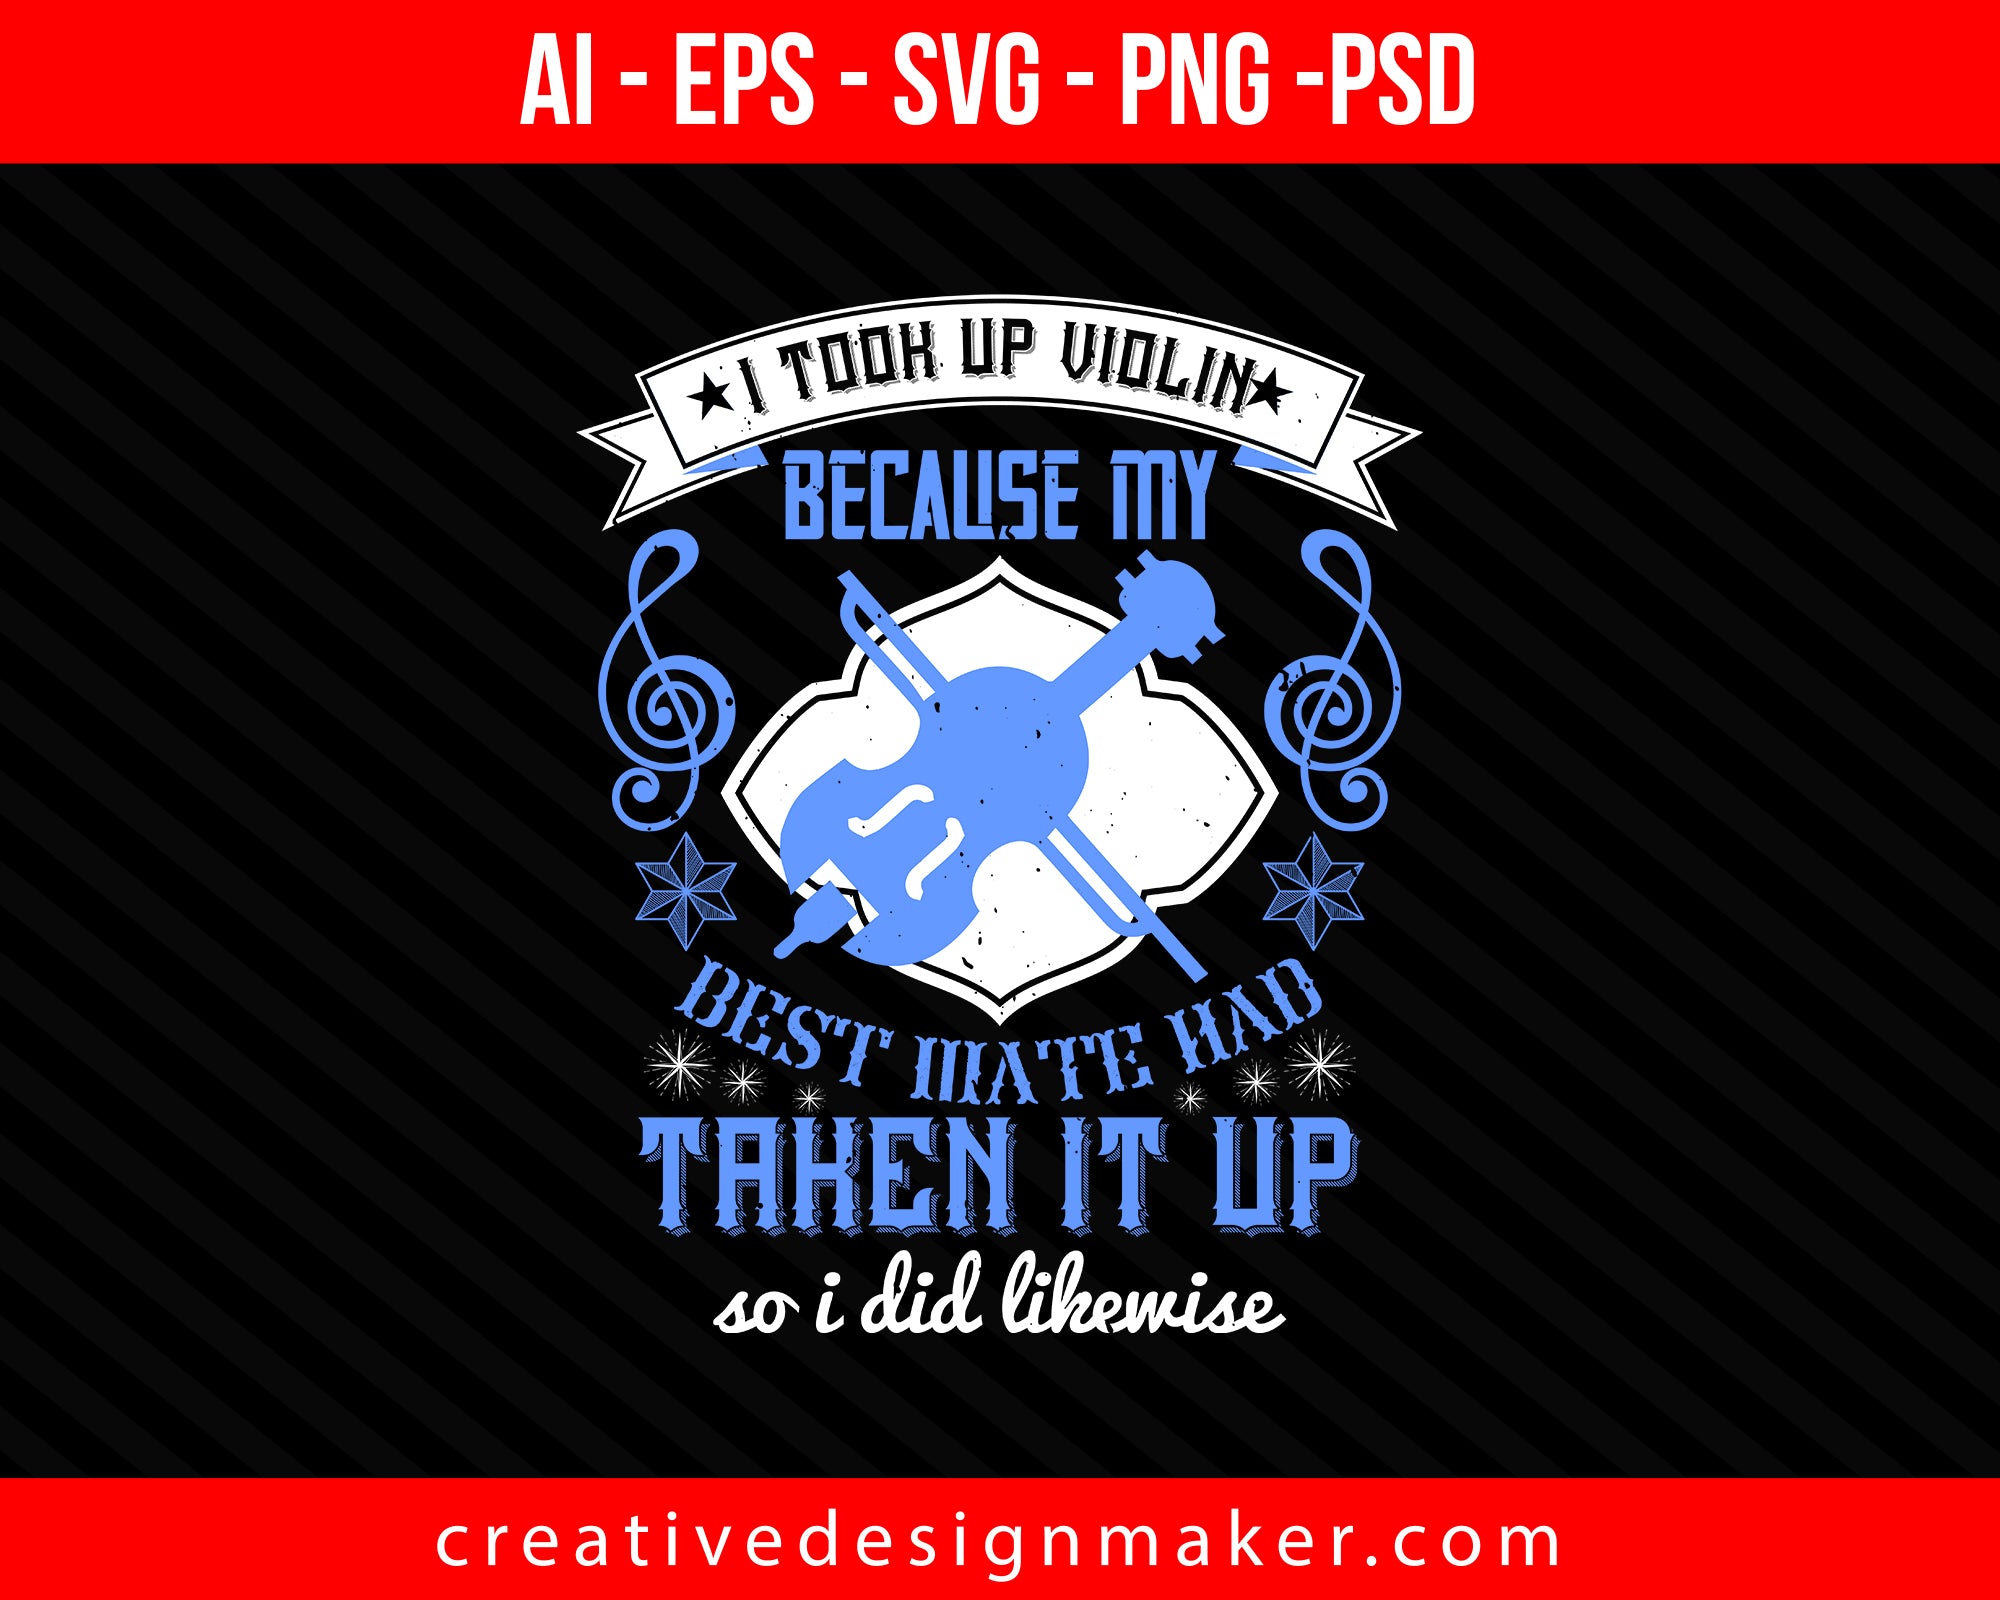 i took up violin because my best mate had taken it up,so i did likewise Print Ready Editable T-Shirt SVG Design!